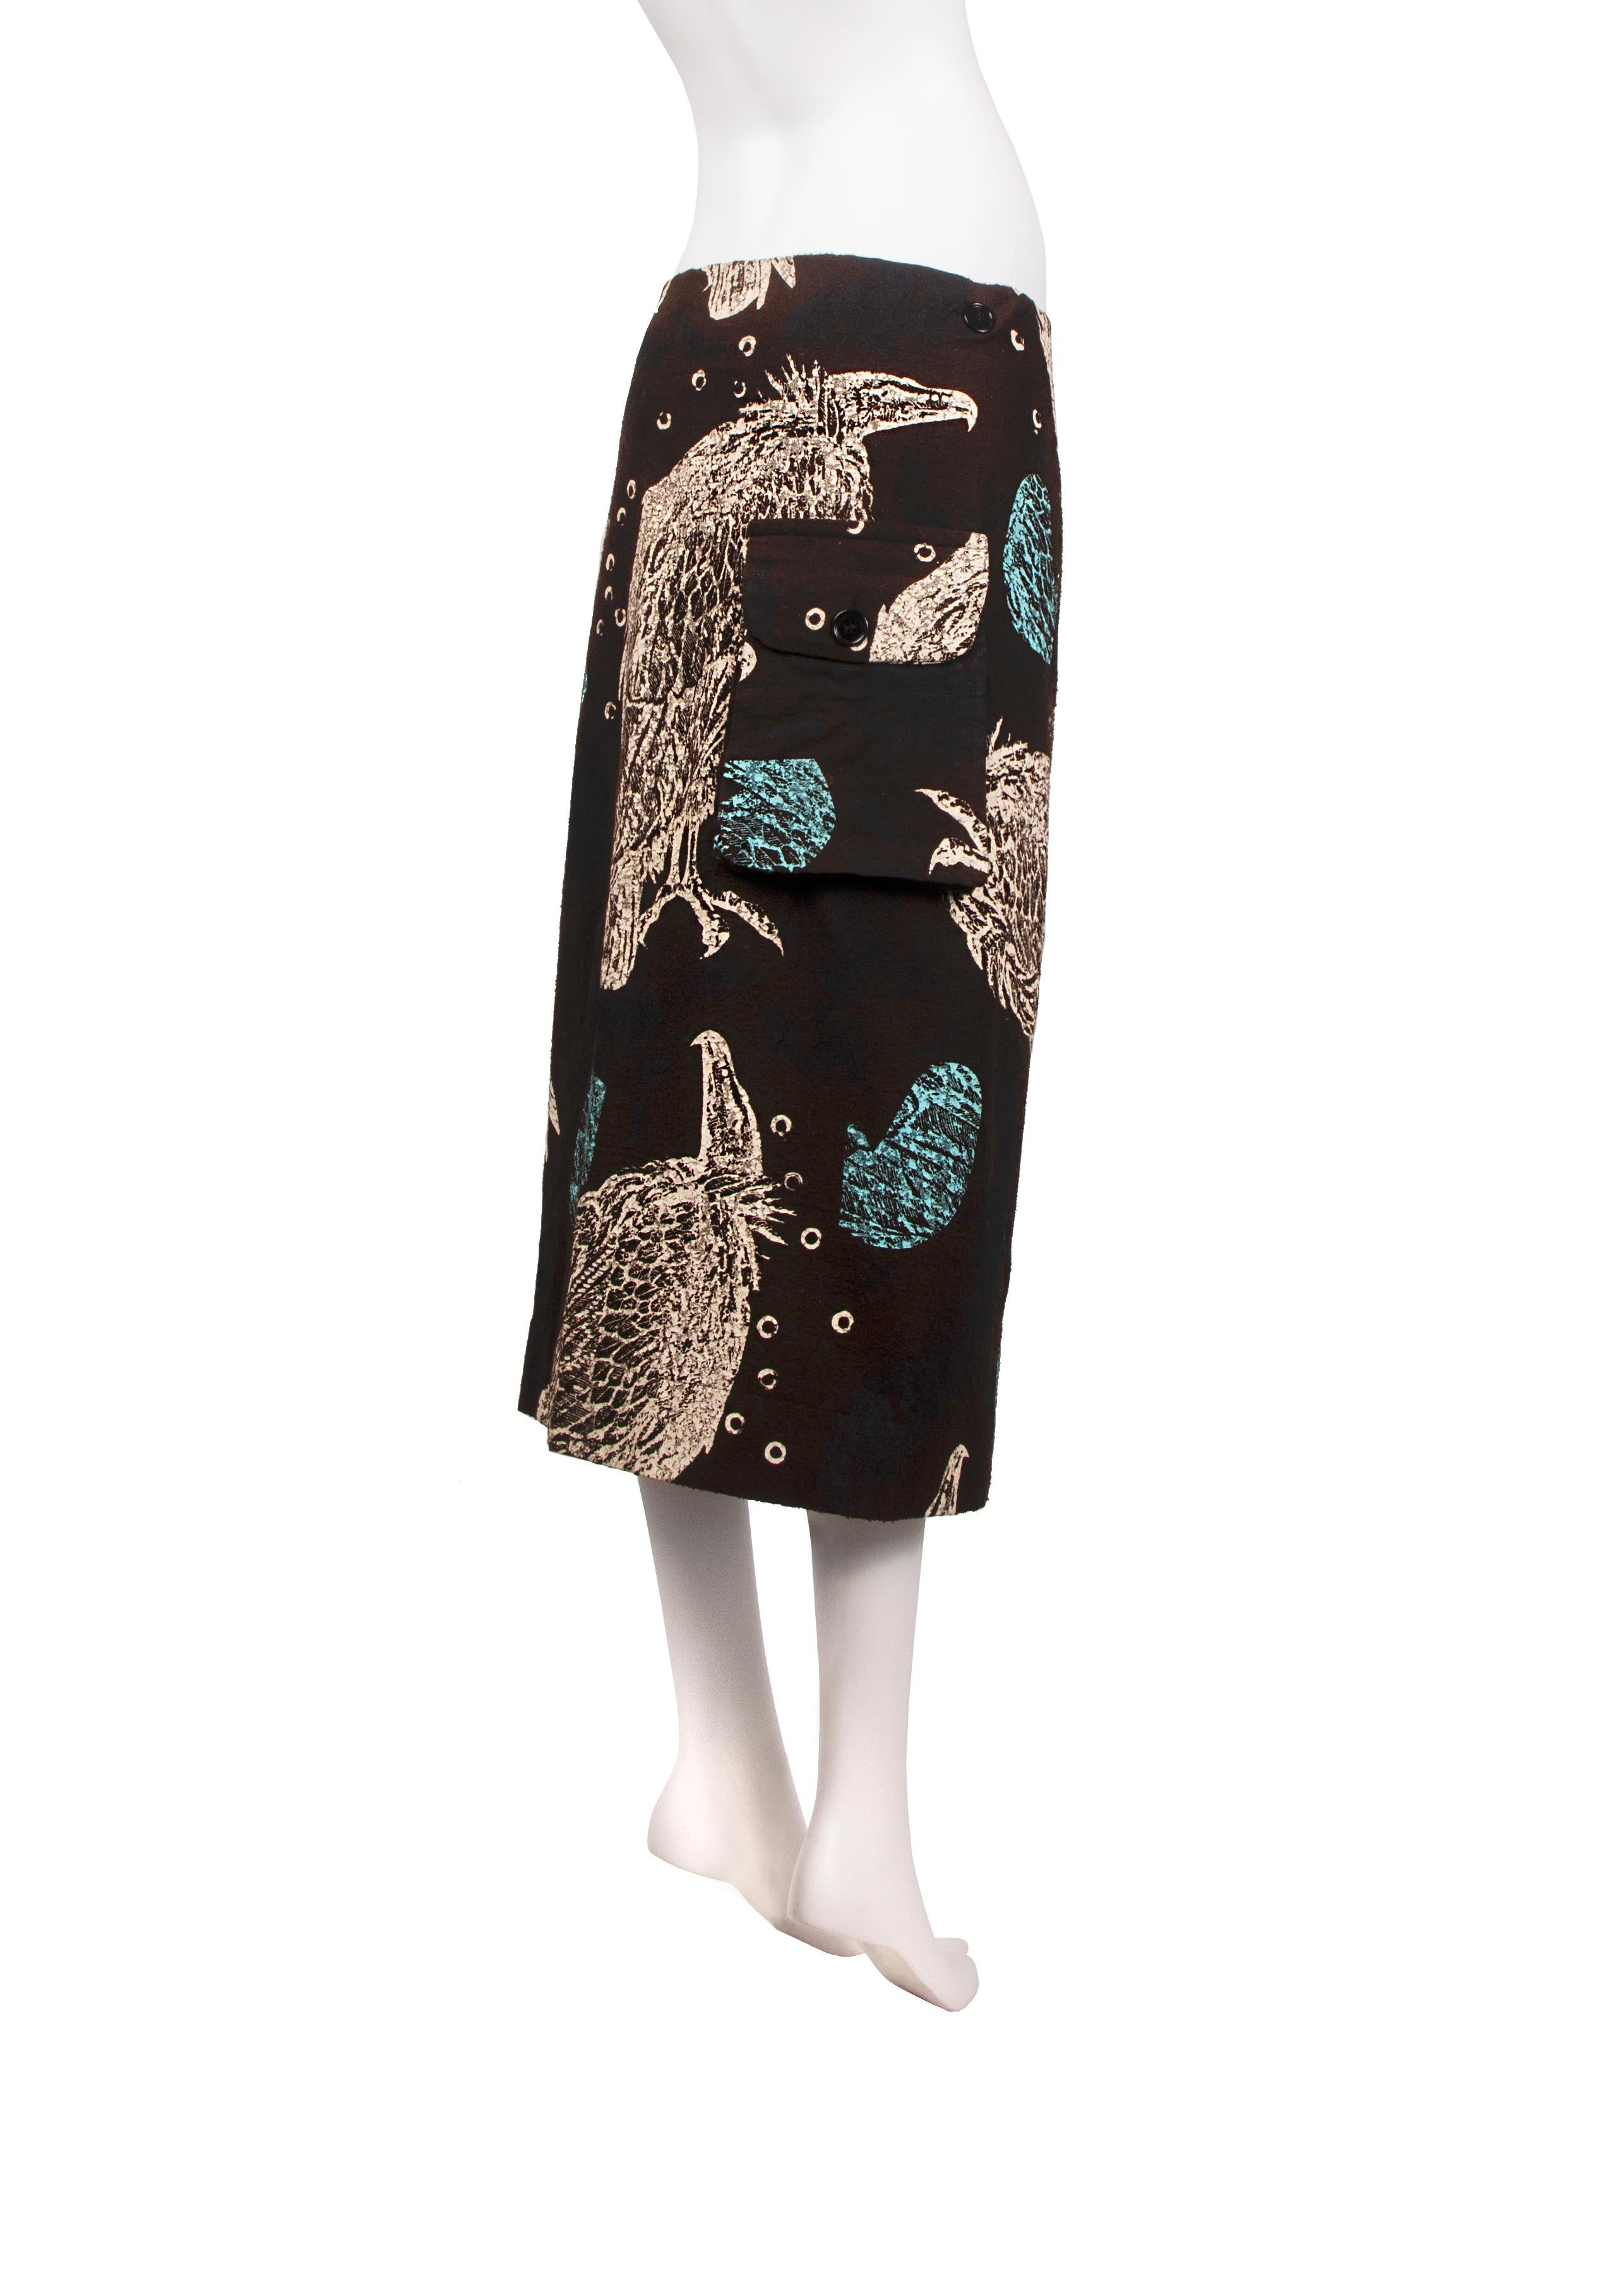 John Galliano ‘The Ludic Games’ vulture skirt, fw 1985 For Sale 2